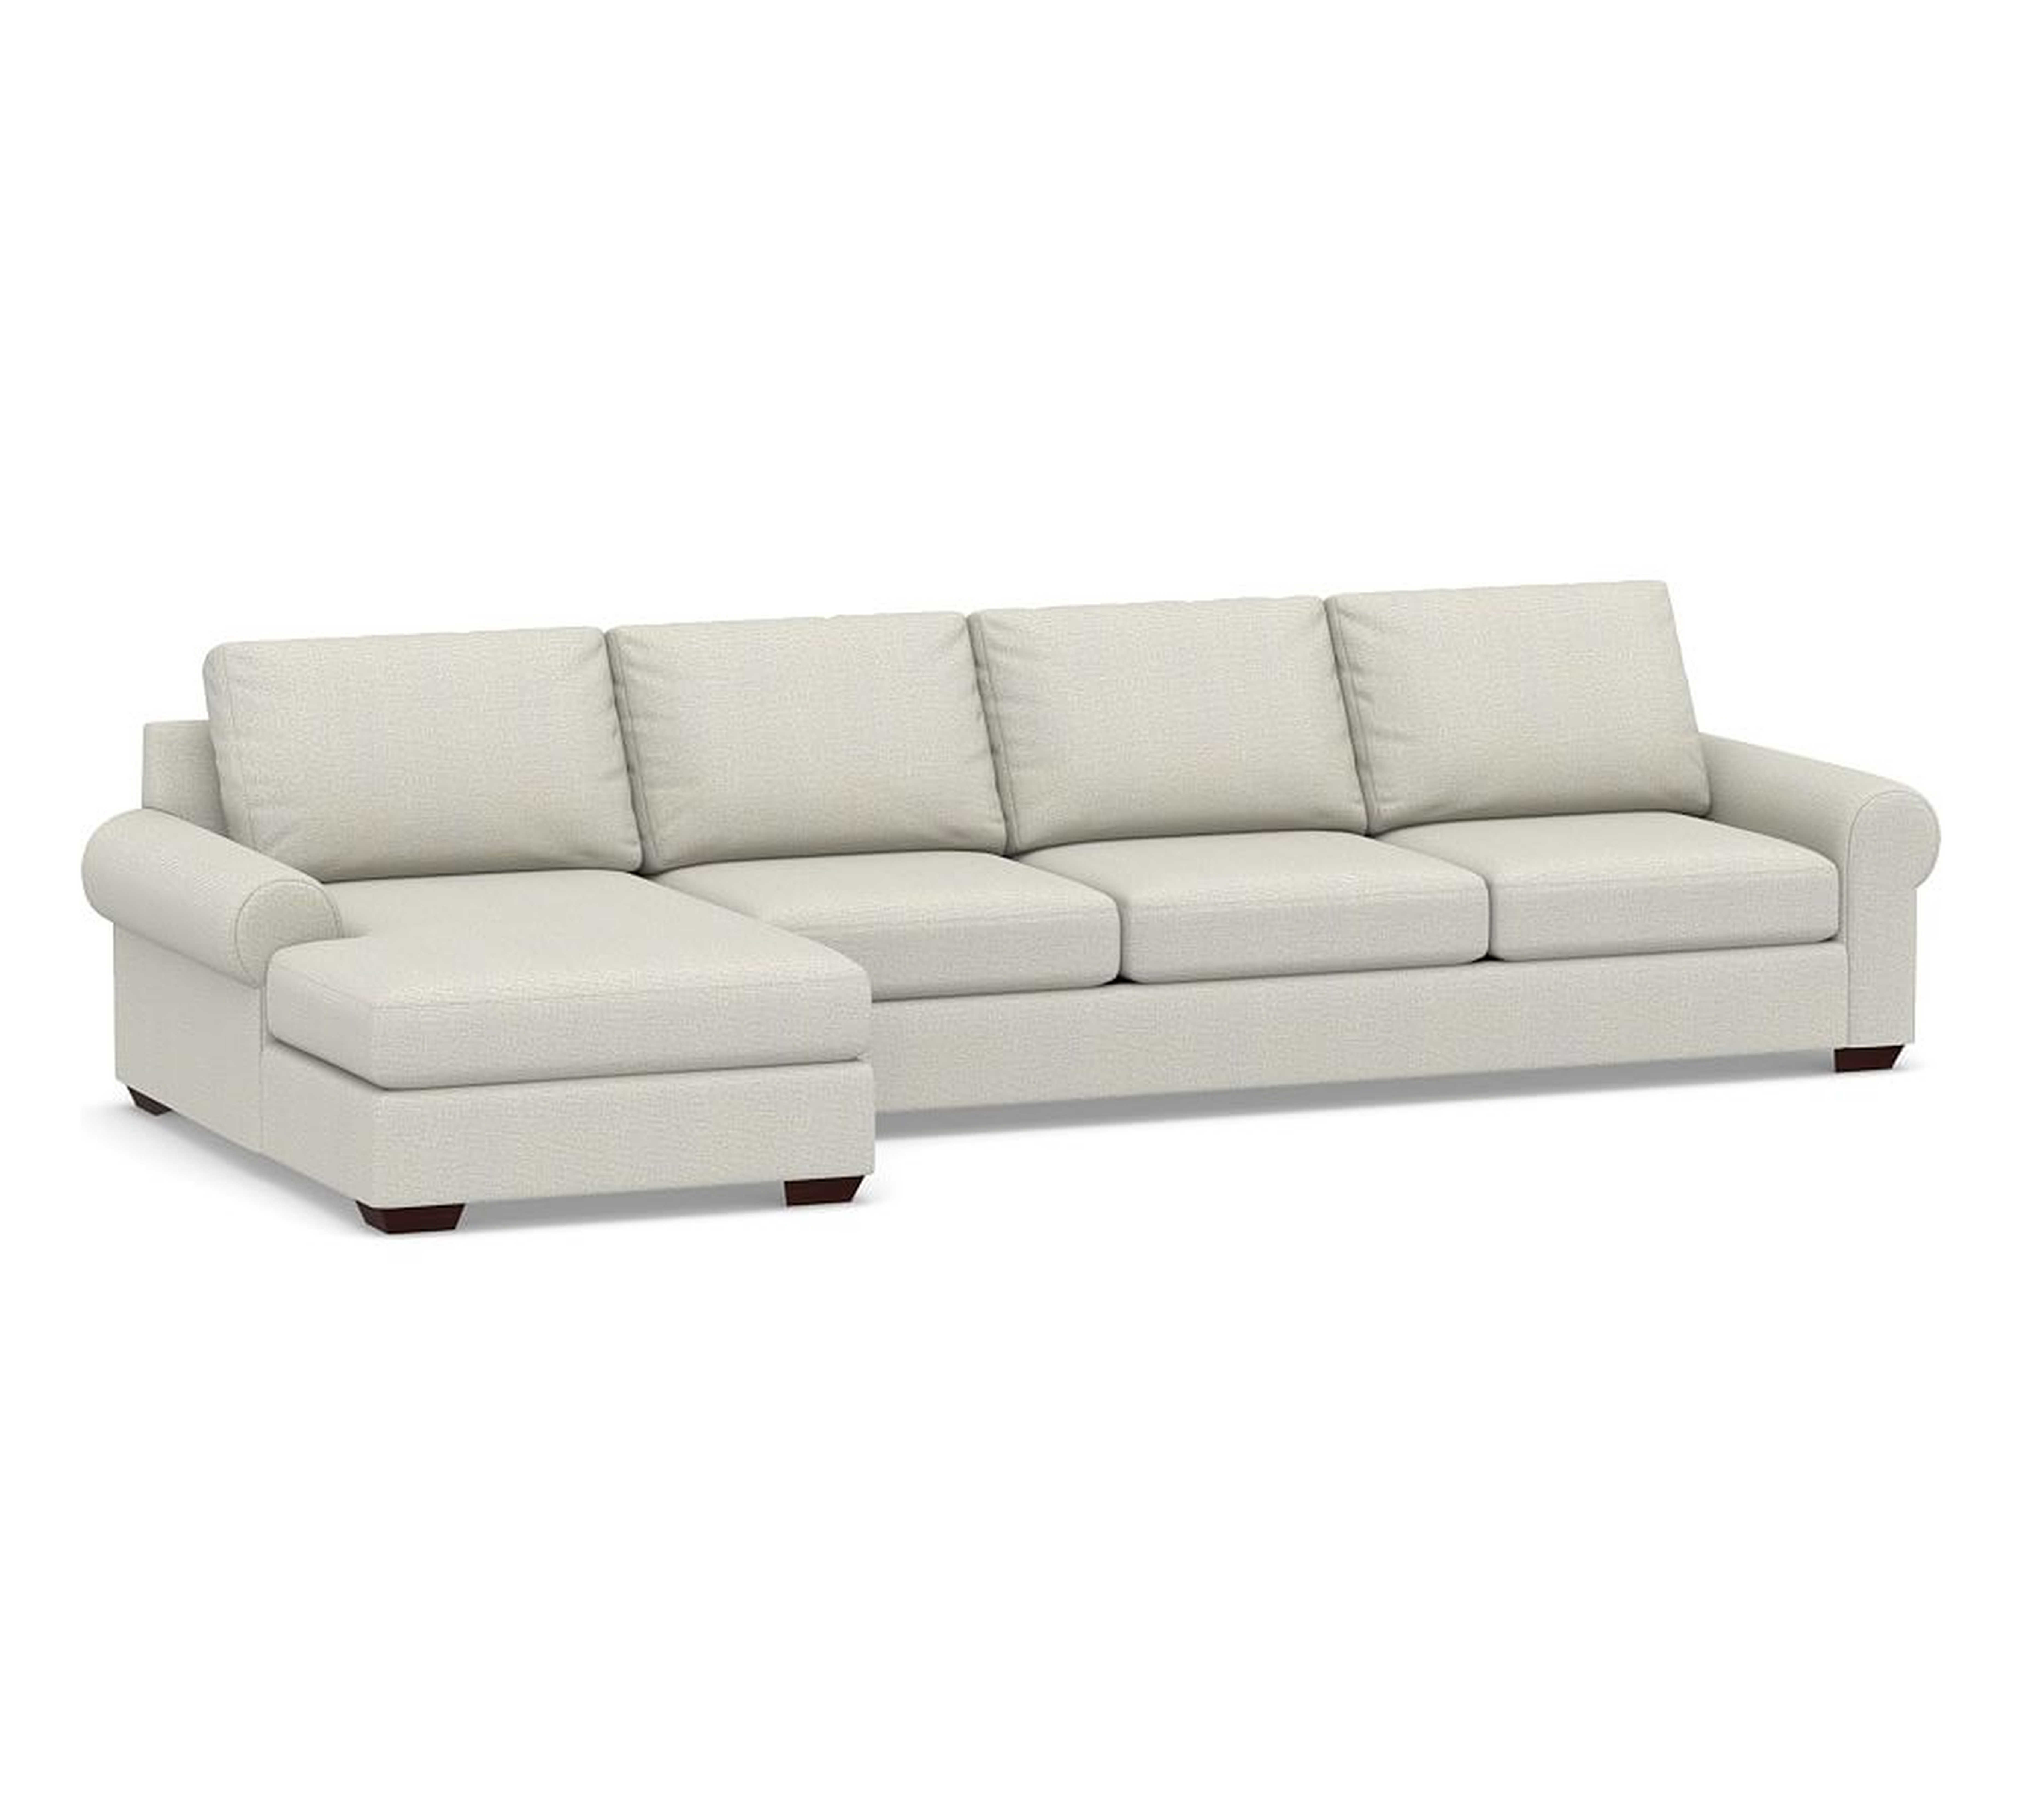 Big Sur Roll Arm Upholstered Right Arm Grand Sofa with Chaise Sectional, Down Blend Wrapped Cushions, Performance Heathered Basketweave Dove - Pottery Barn